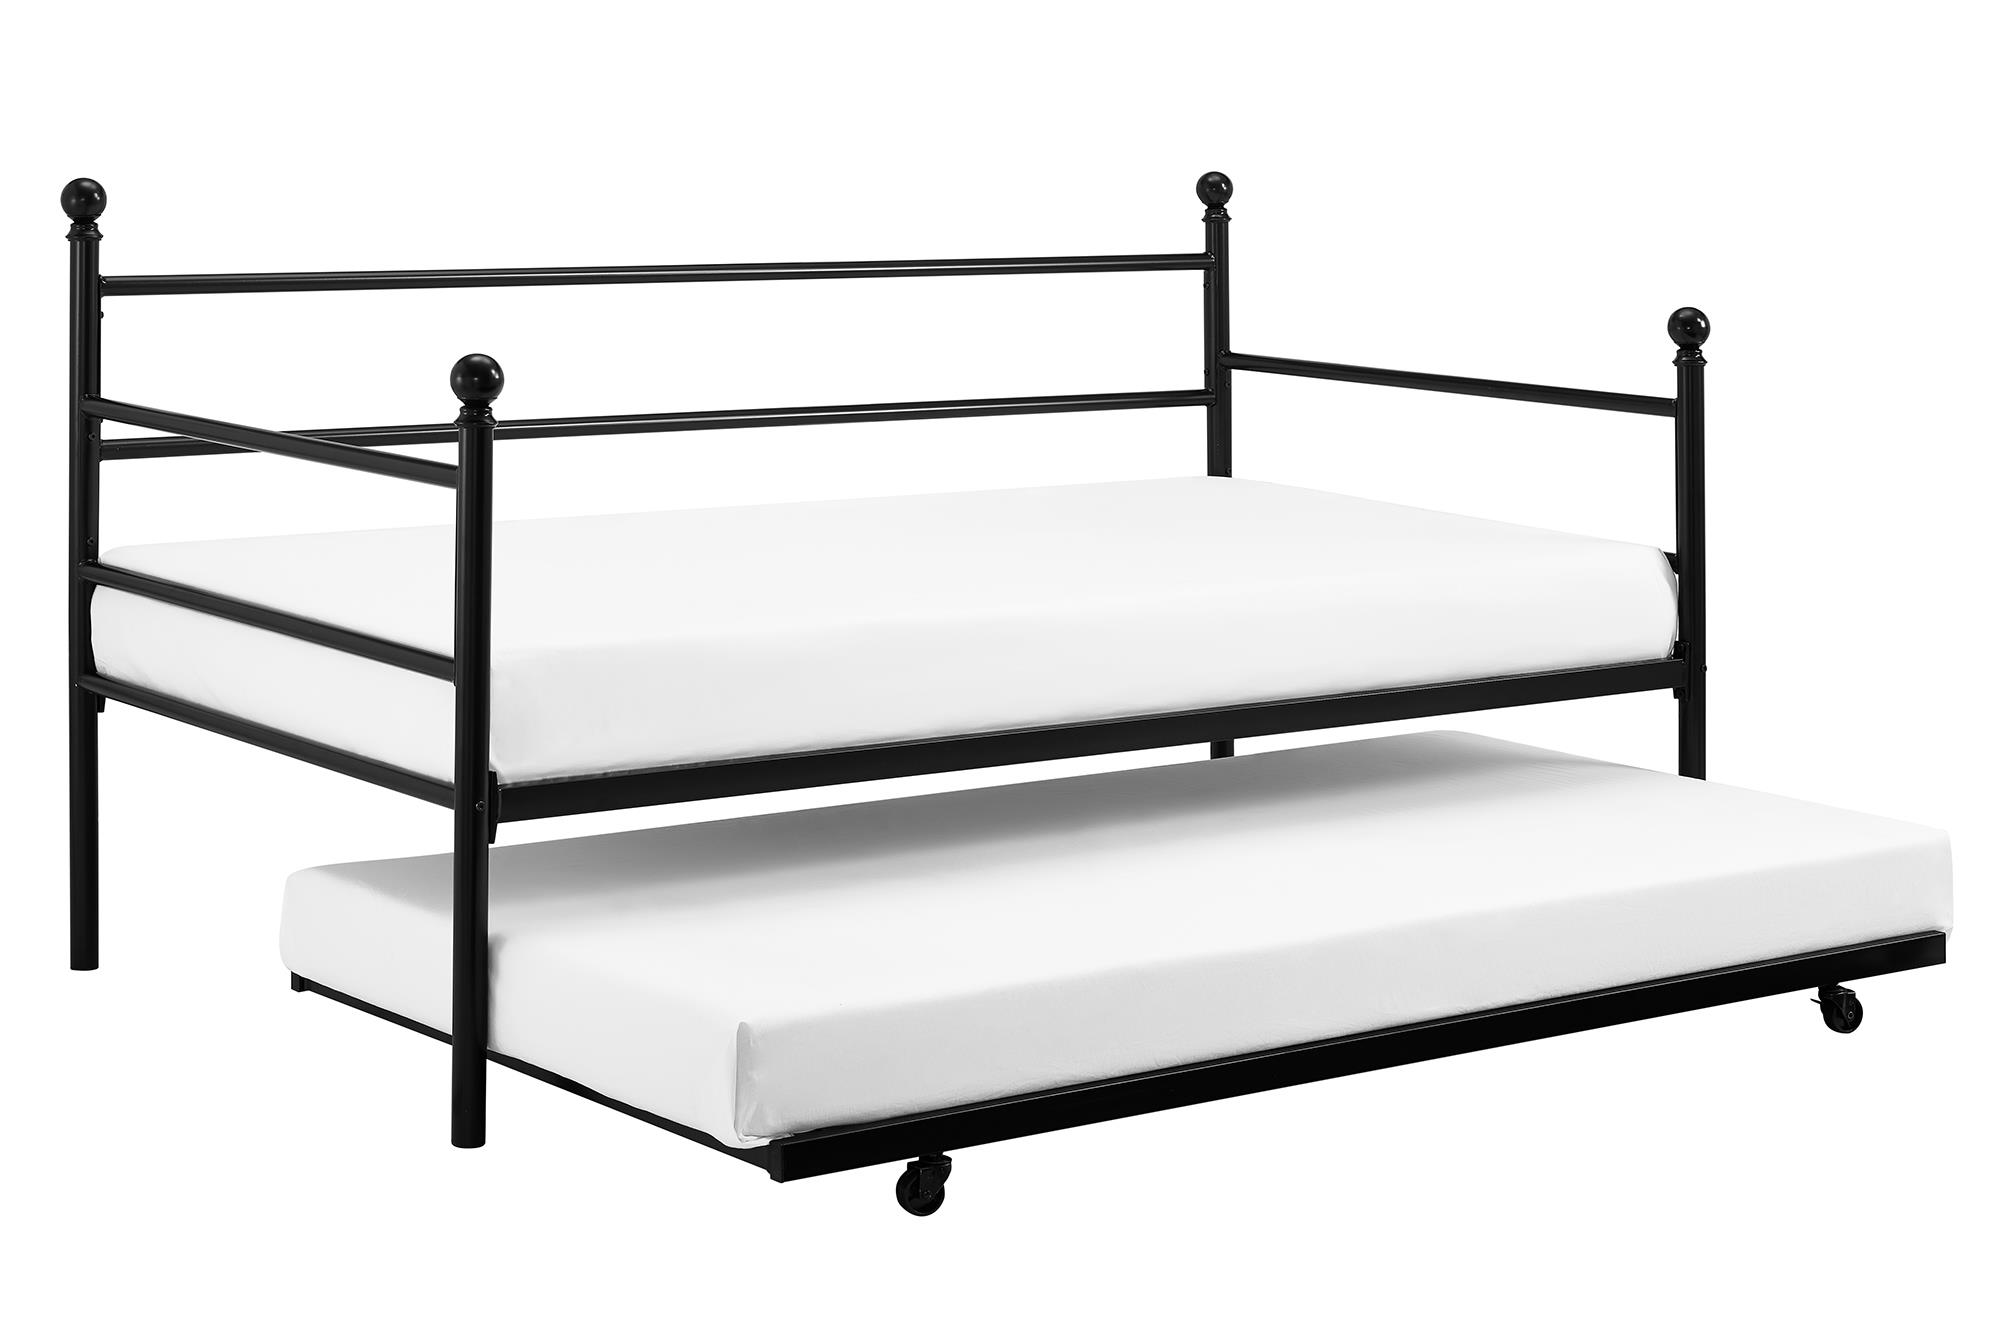 Mainstays Modern Metal Daybed with Trundle, Twin Size Frame, Black - image 5 of 18